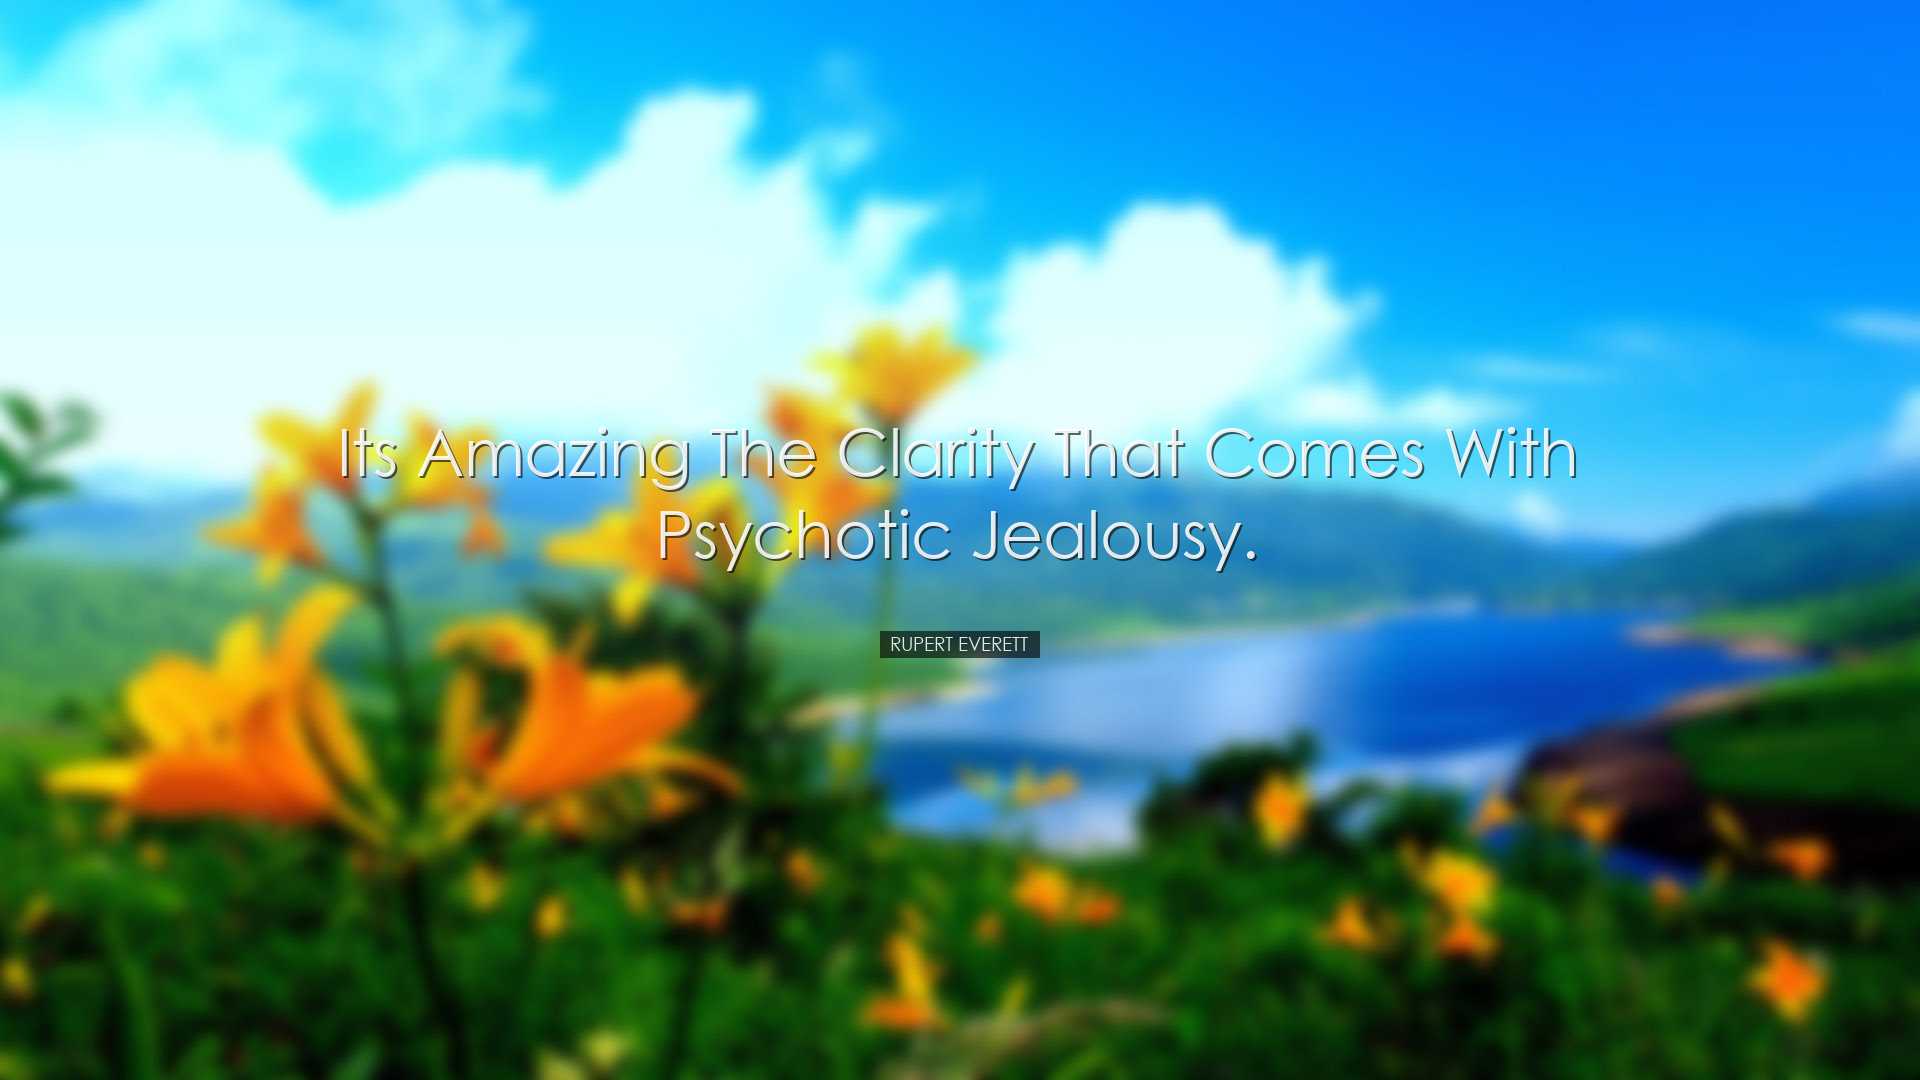 Its amazing the clarity that comes with psychotic jealousy. - Rupe